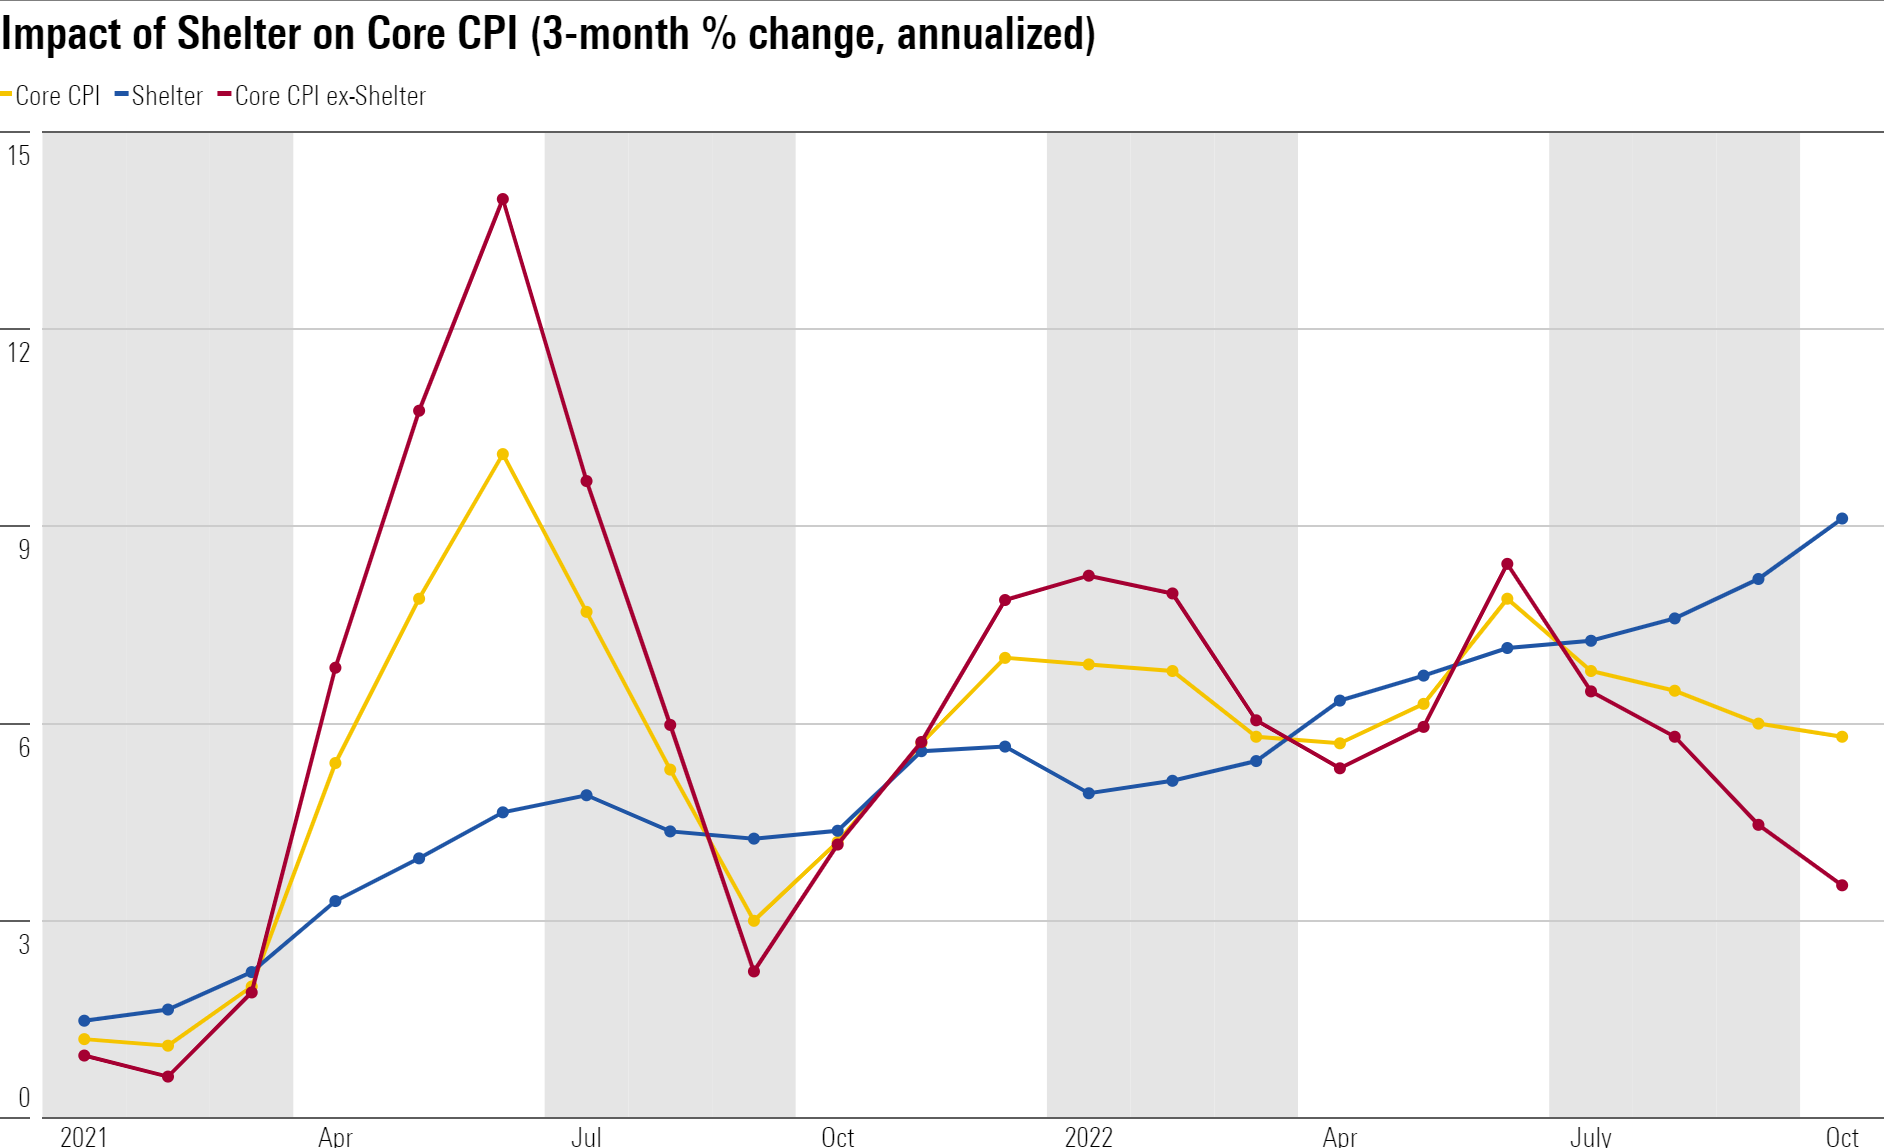 Line chart of core CPI inflation, with and without shelter prices